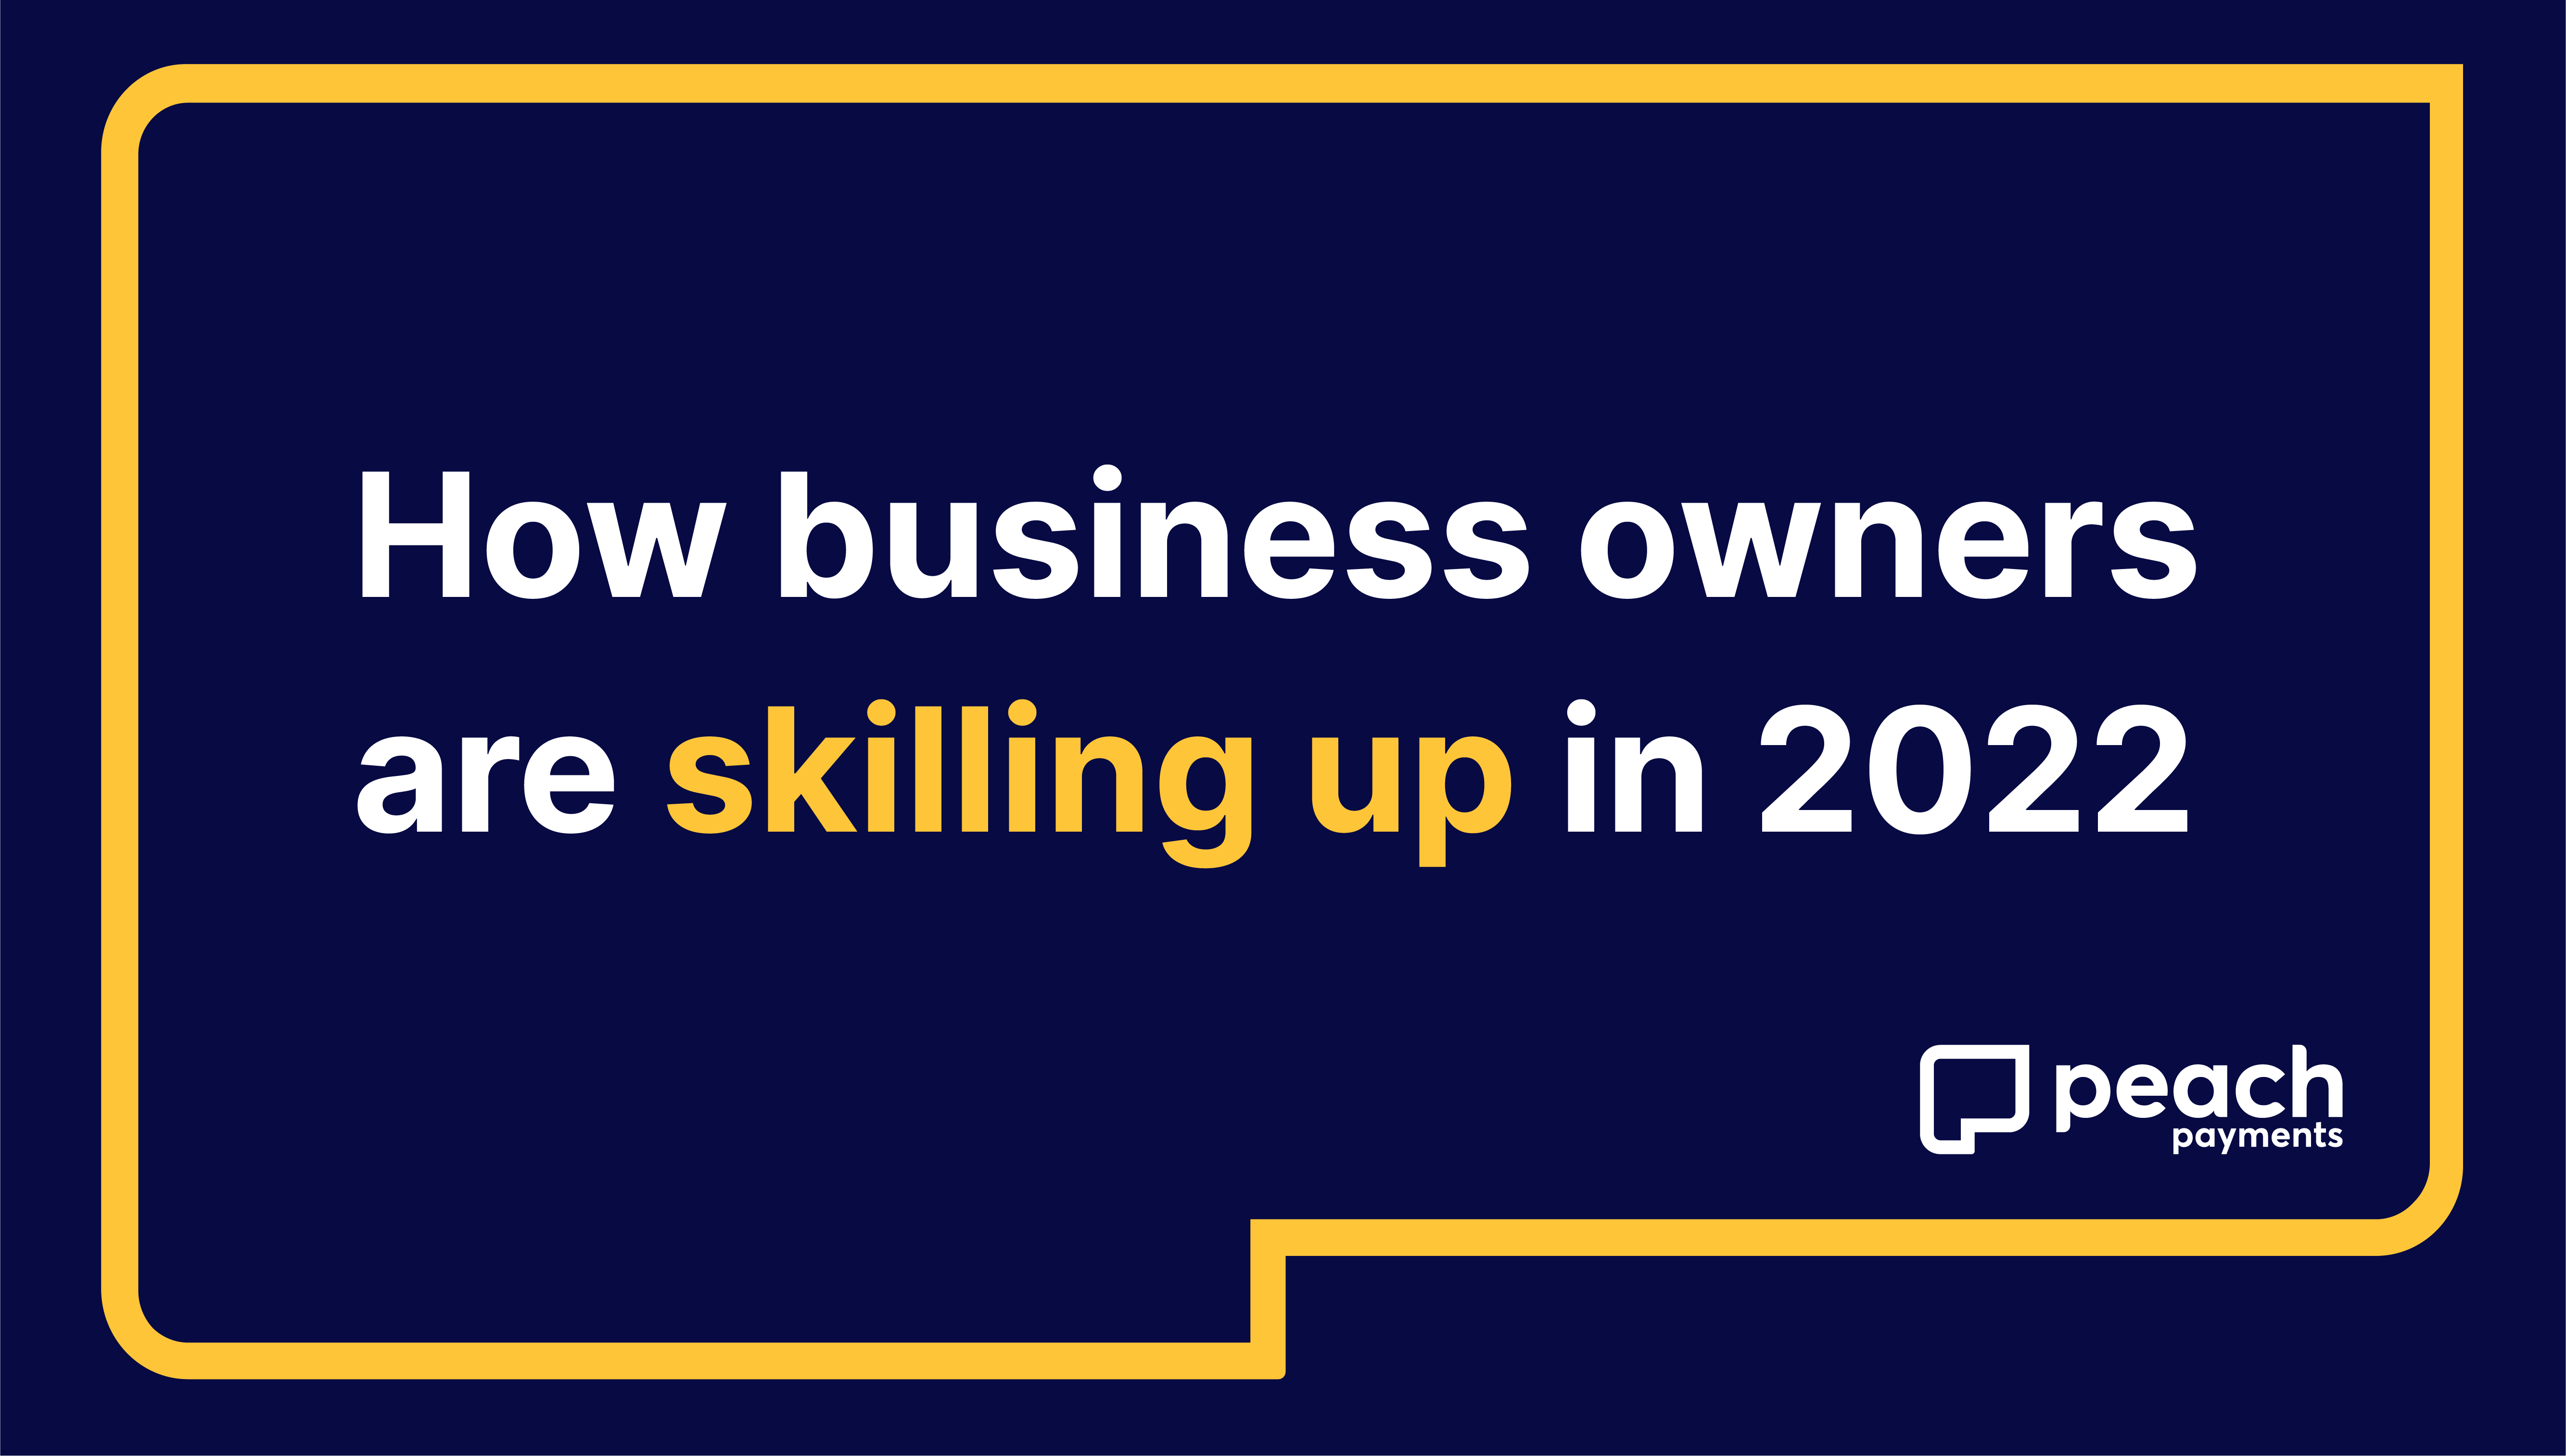 How business owners are skilling up in 2022